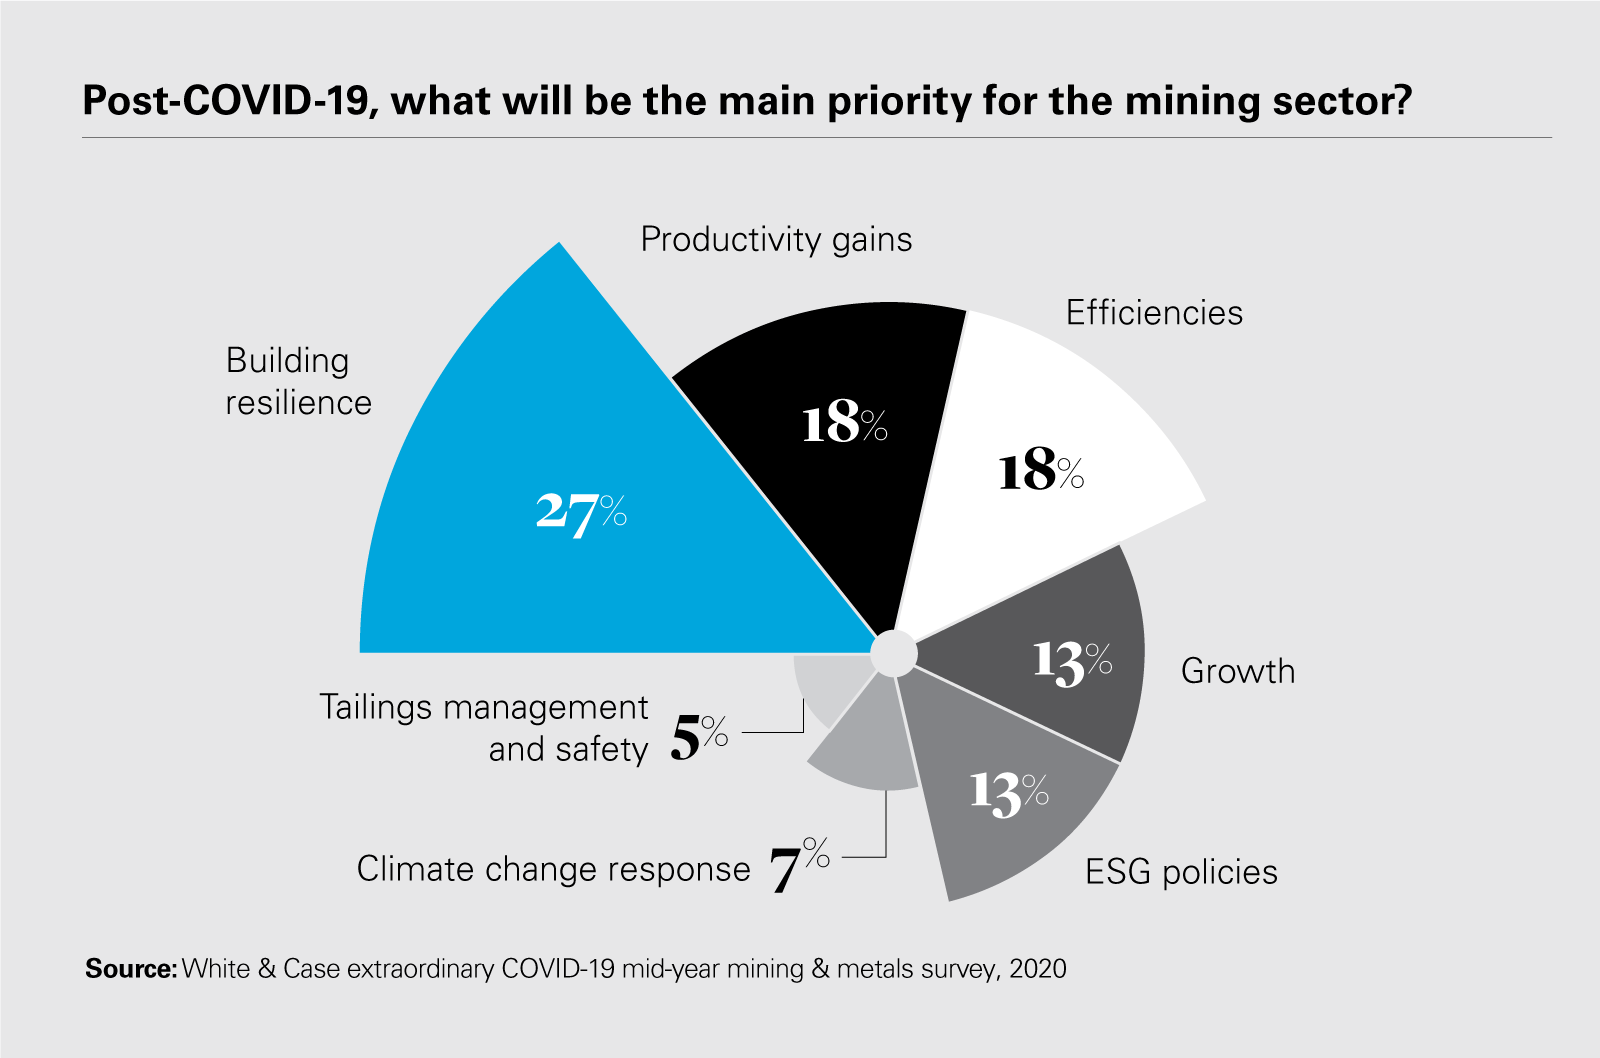 Post-COVID-19, what will be the main priority for the mining sector?